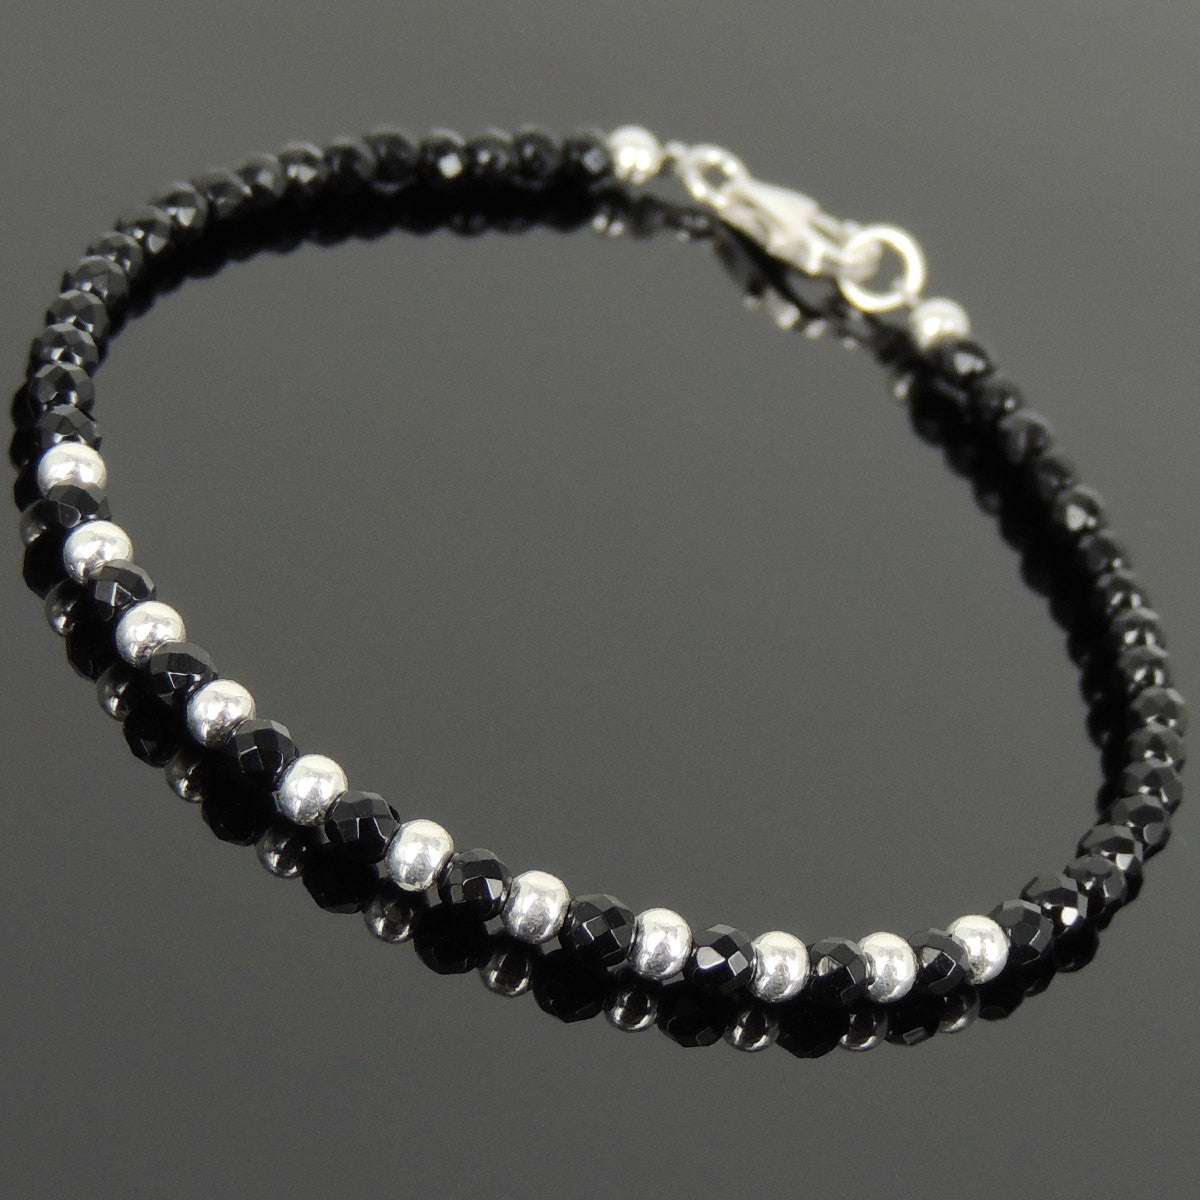 3mm Faceted Bright Black Onyx Healing Gemstone Bracelet with S925 Sterling Silver Spacer Beads & Clasp - Handmade by Gem & Silver BR944